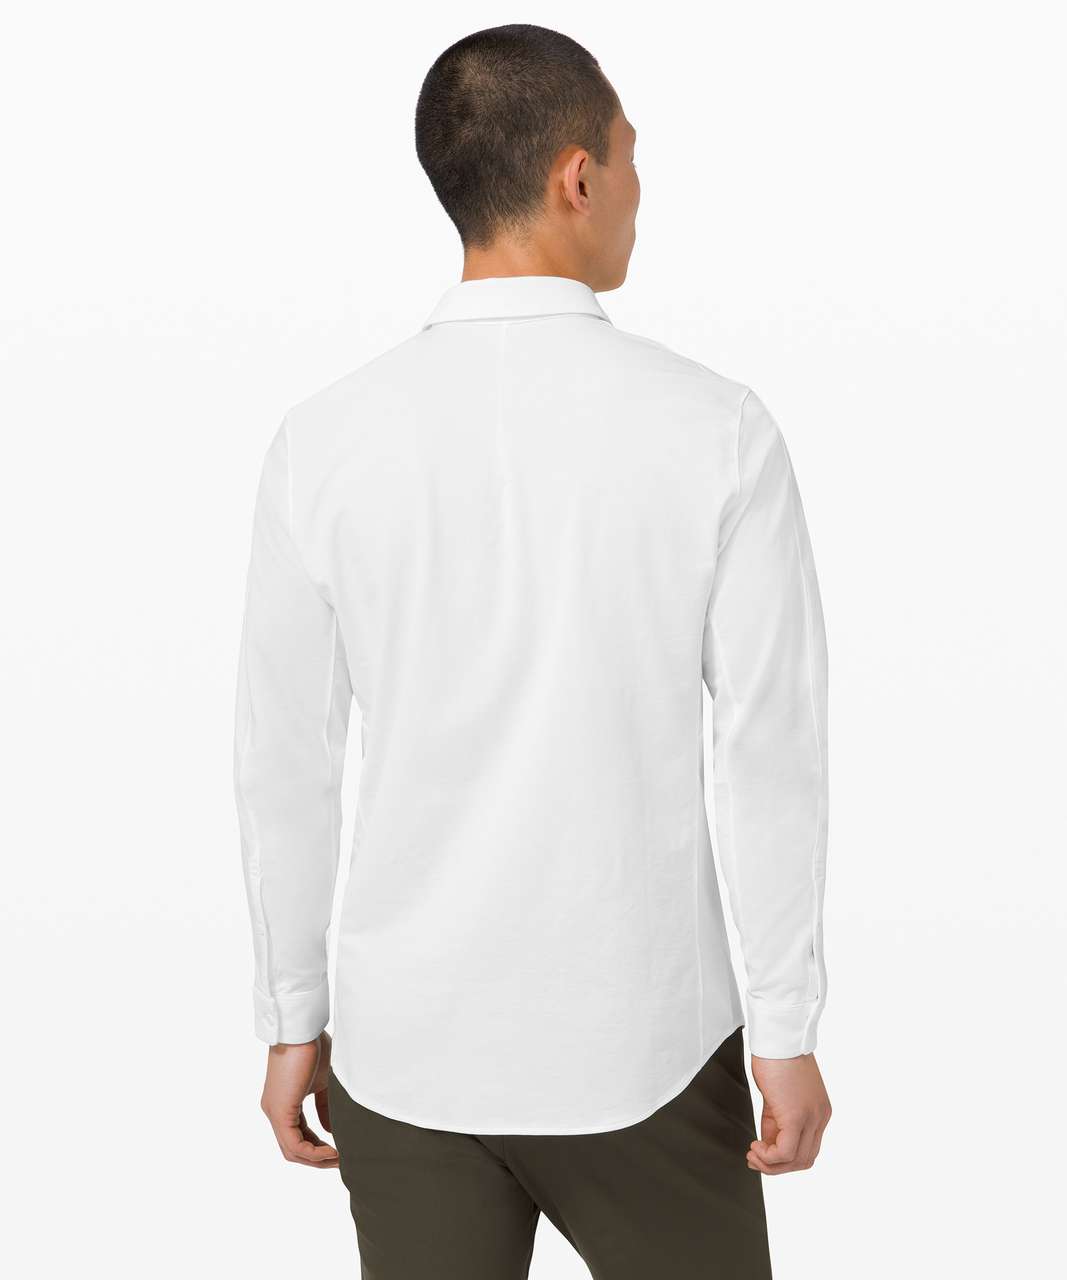 Lululemon Commission Long Sleeve Shirt - White (First Release)